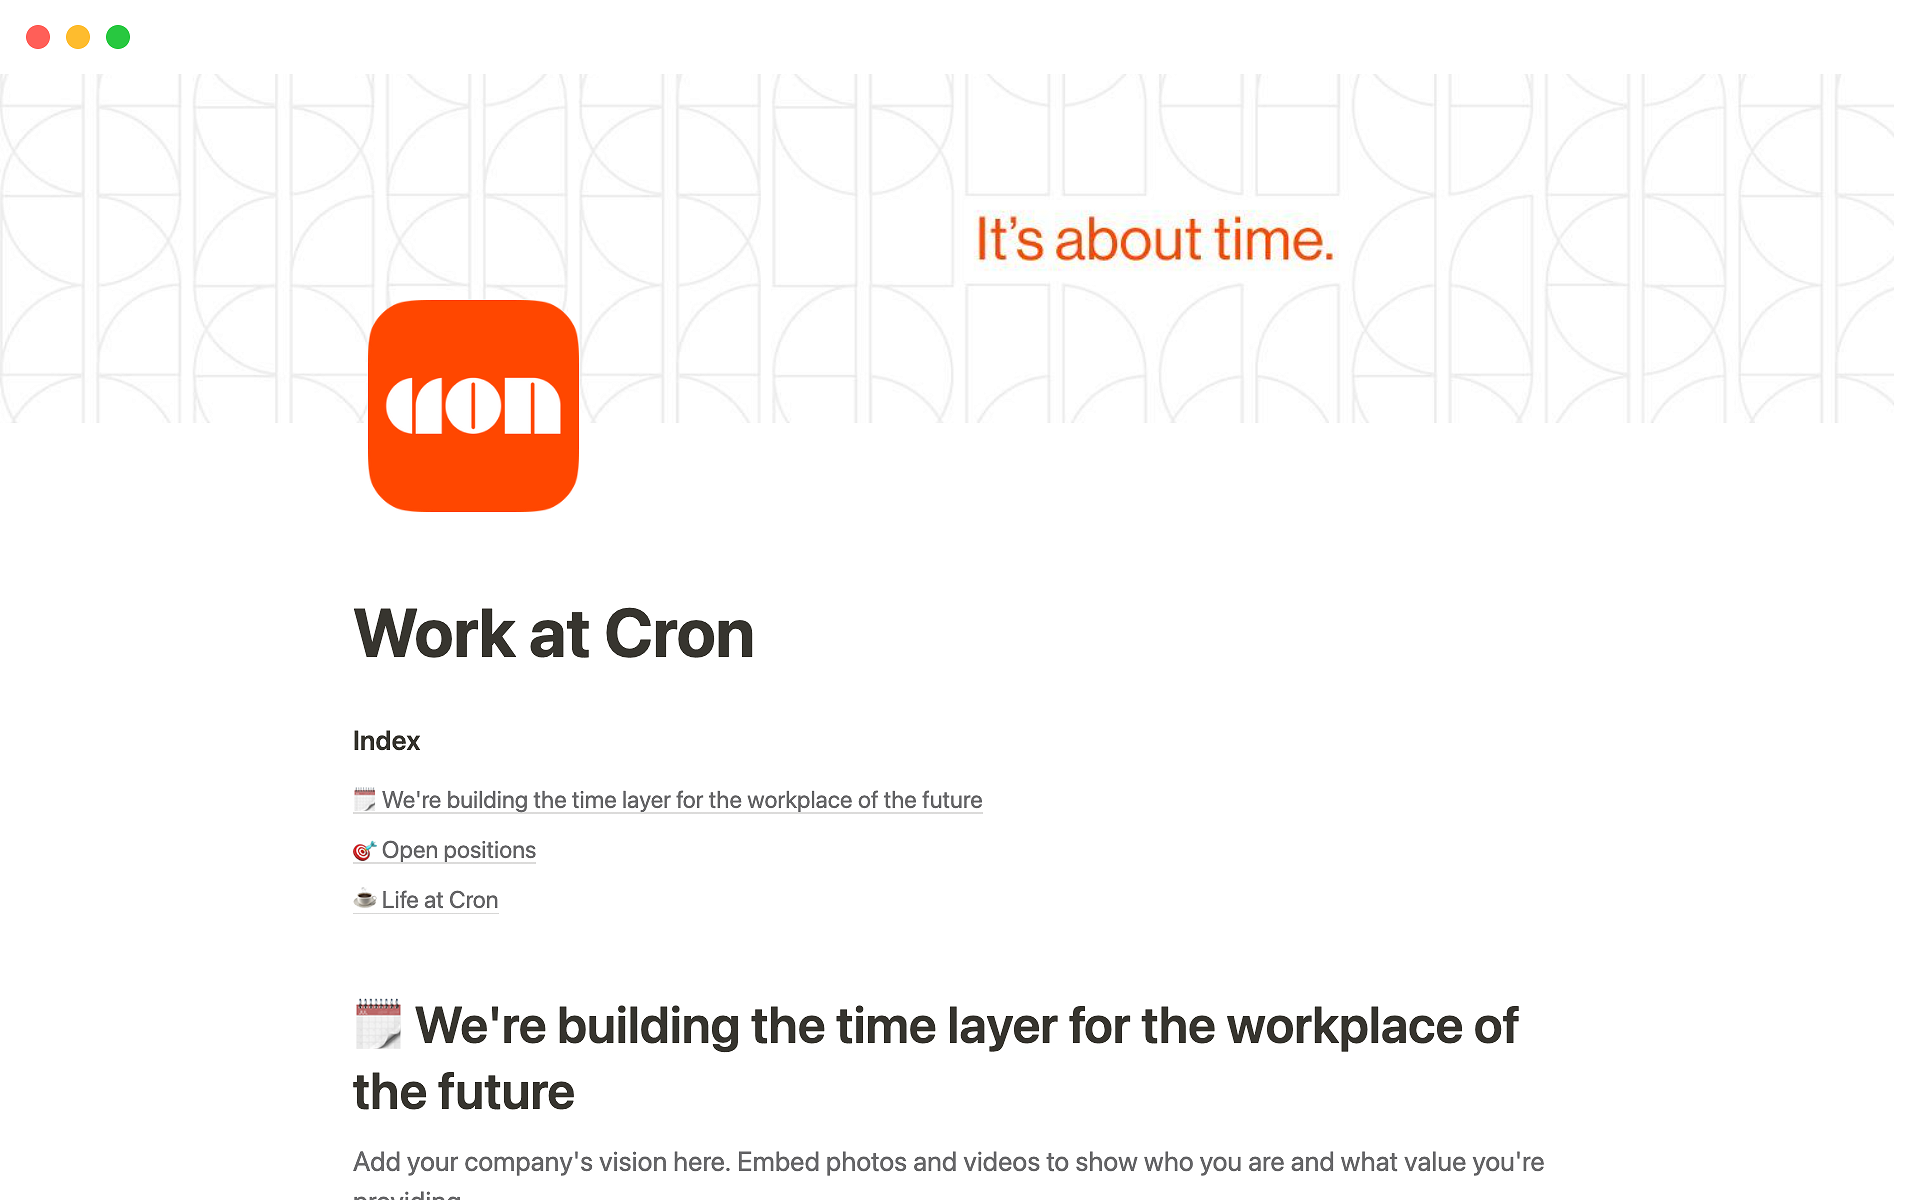 The desktop image for the Cron's job postings template